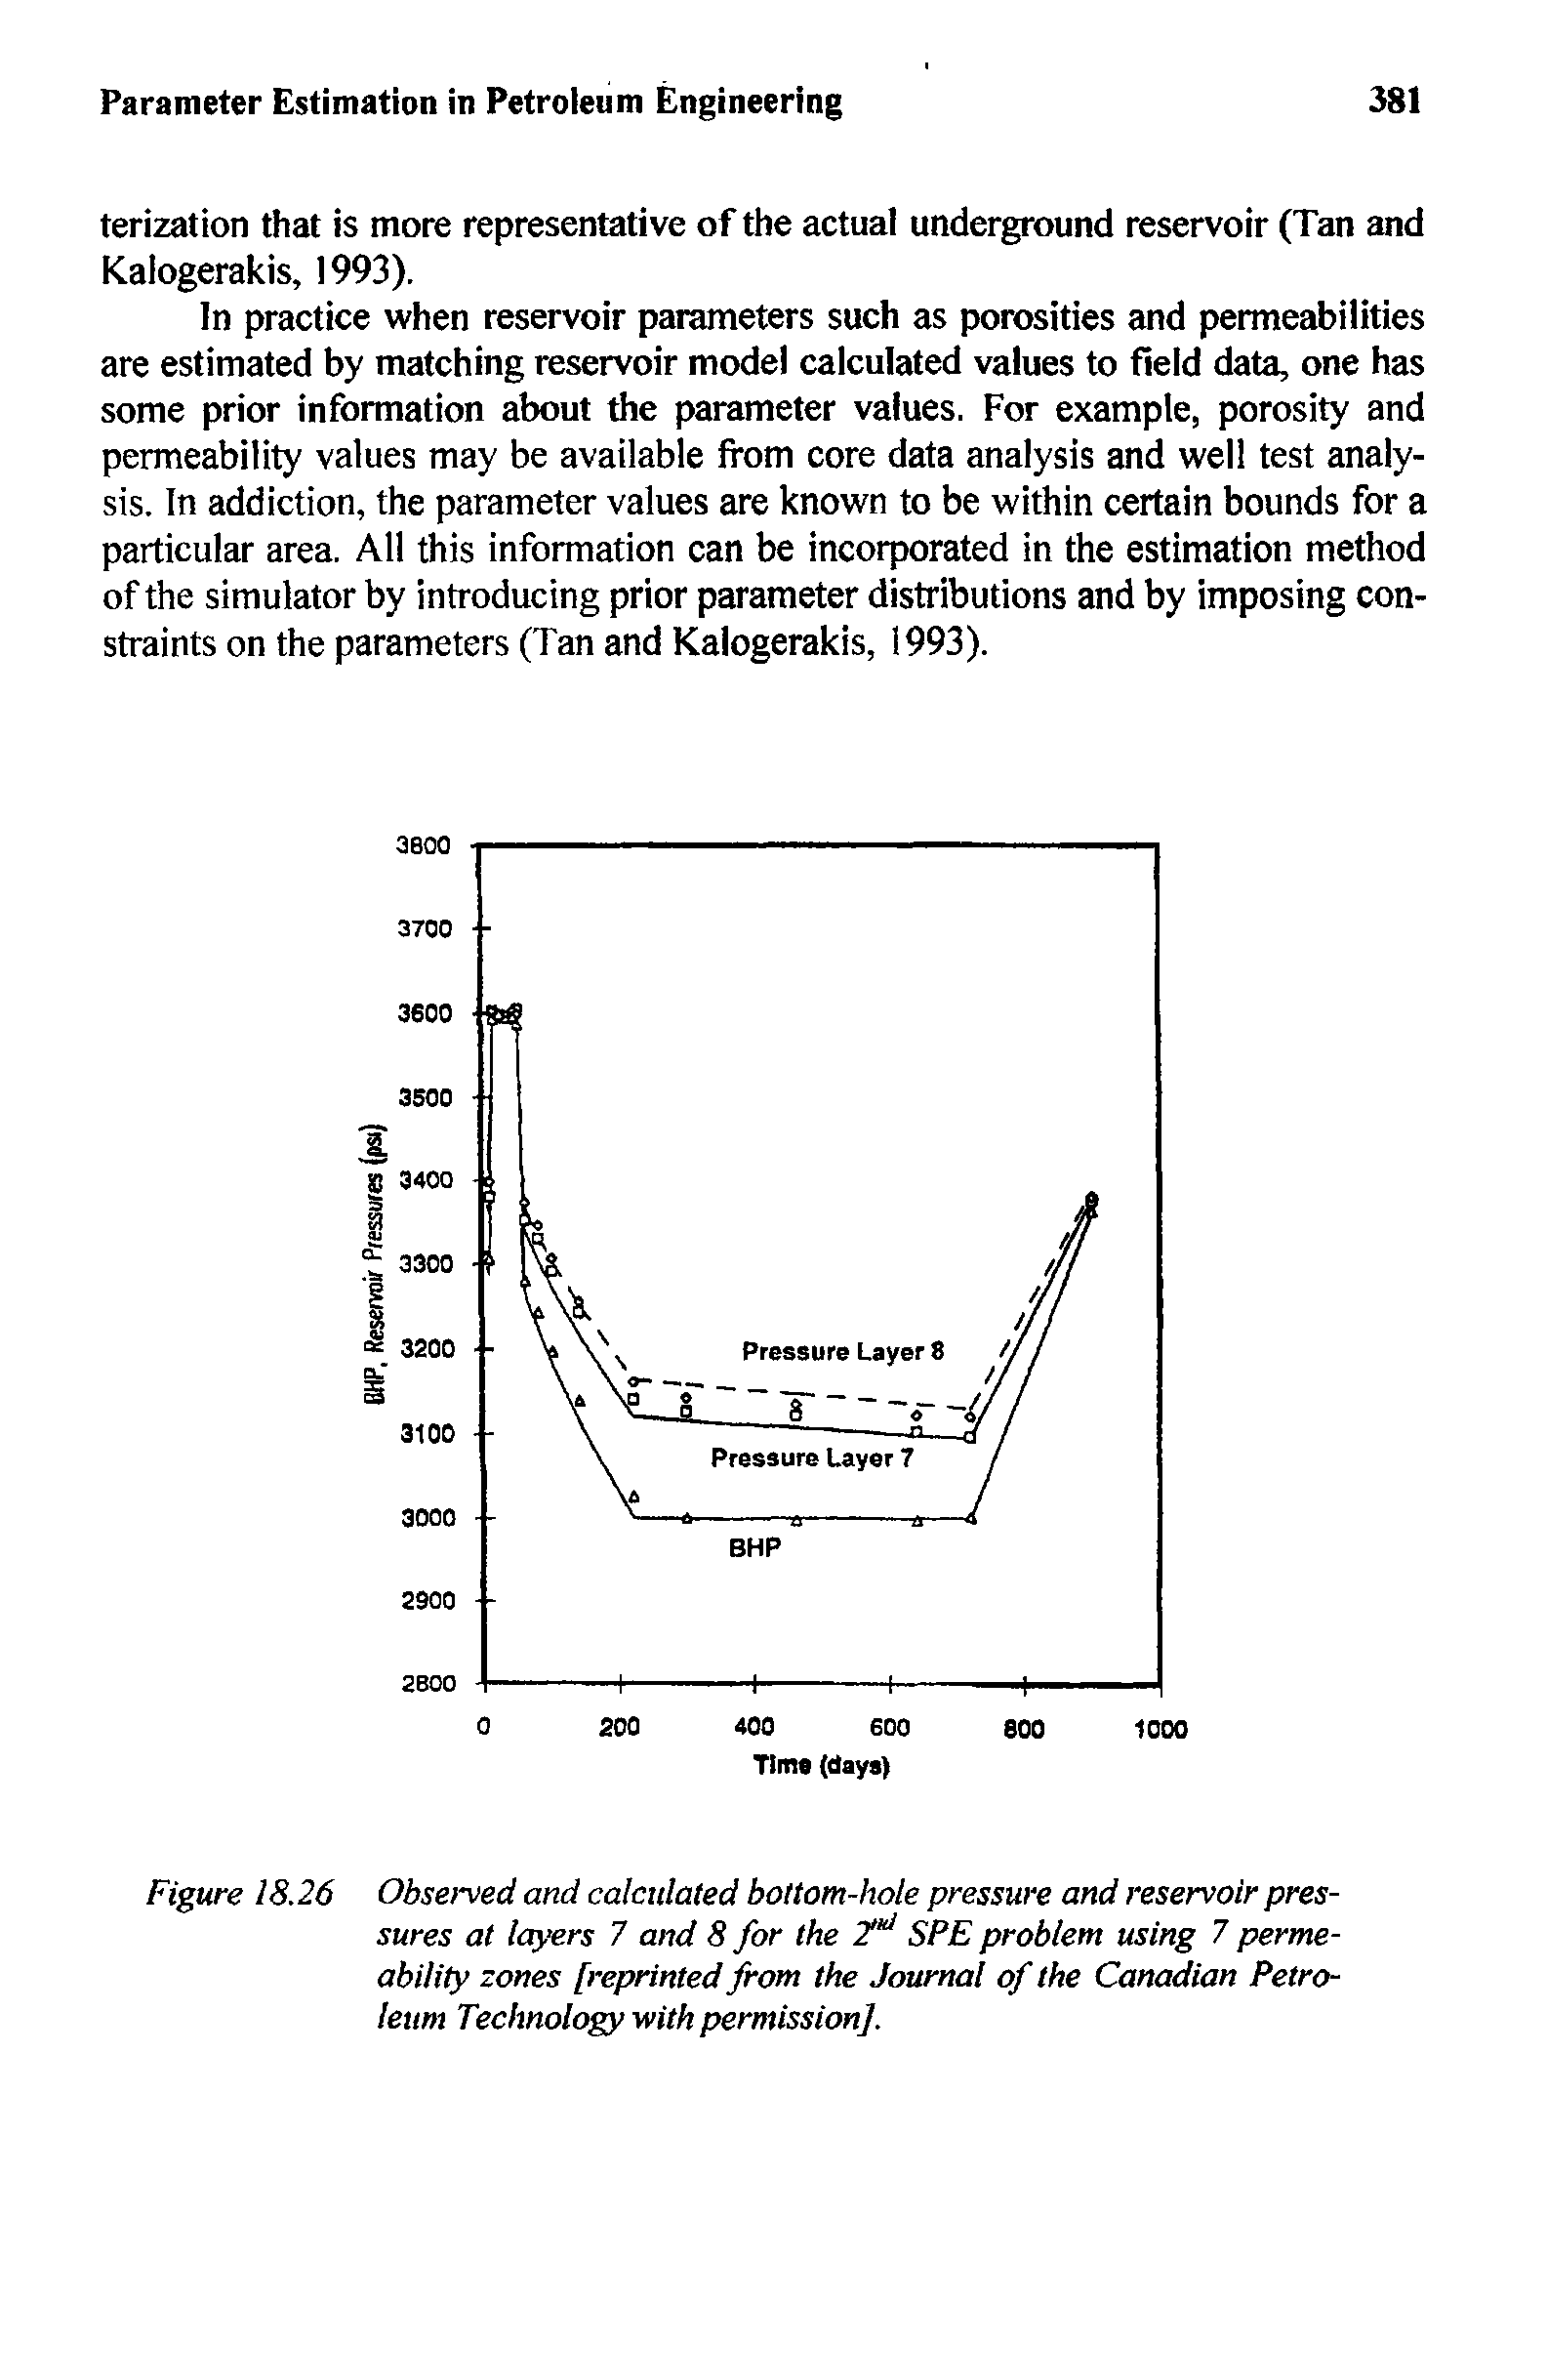 Figure 18.26 Observed and calculated bottom-hole pressure and reservoir pressures at layers 7 and 8 for the 2" SPE problem using 7 permeability zones [reprinted from the Journal of the Canadian Petroleum Technology with permission].